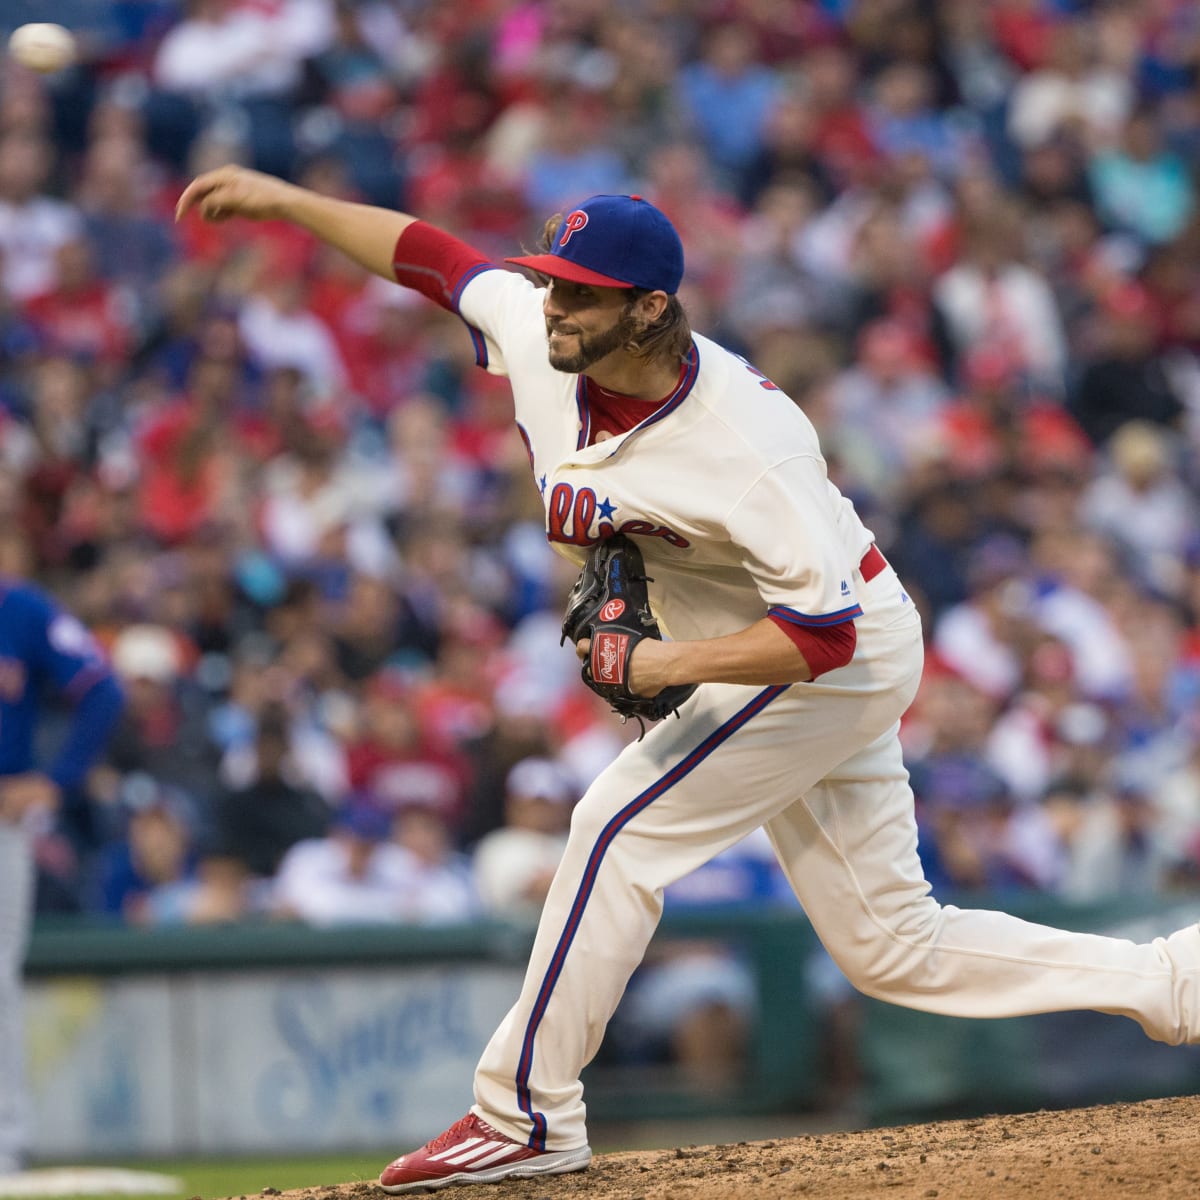 As Tigers come to town, Phillies look like clear winners of offseason trade   Phillies Nation - Your source for Philadelphia Phillies news, opinion,  history, rumors, events, and other fun stuff.